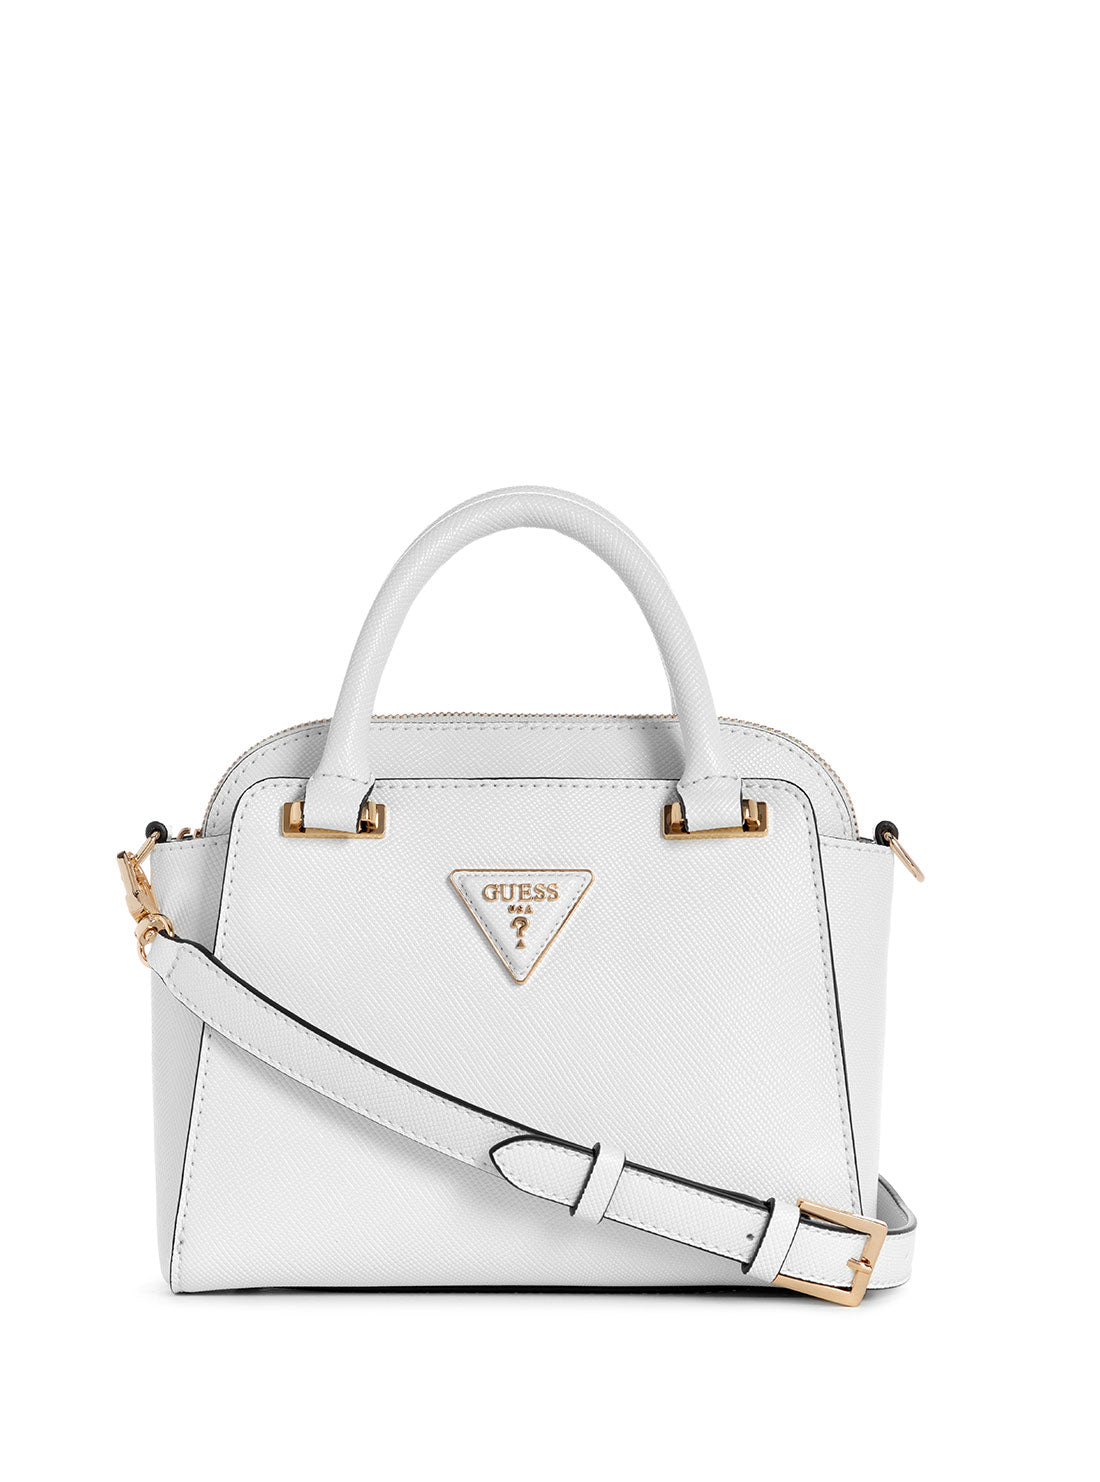 GUESS White Avis Small Satchel Bag front view